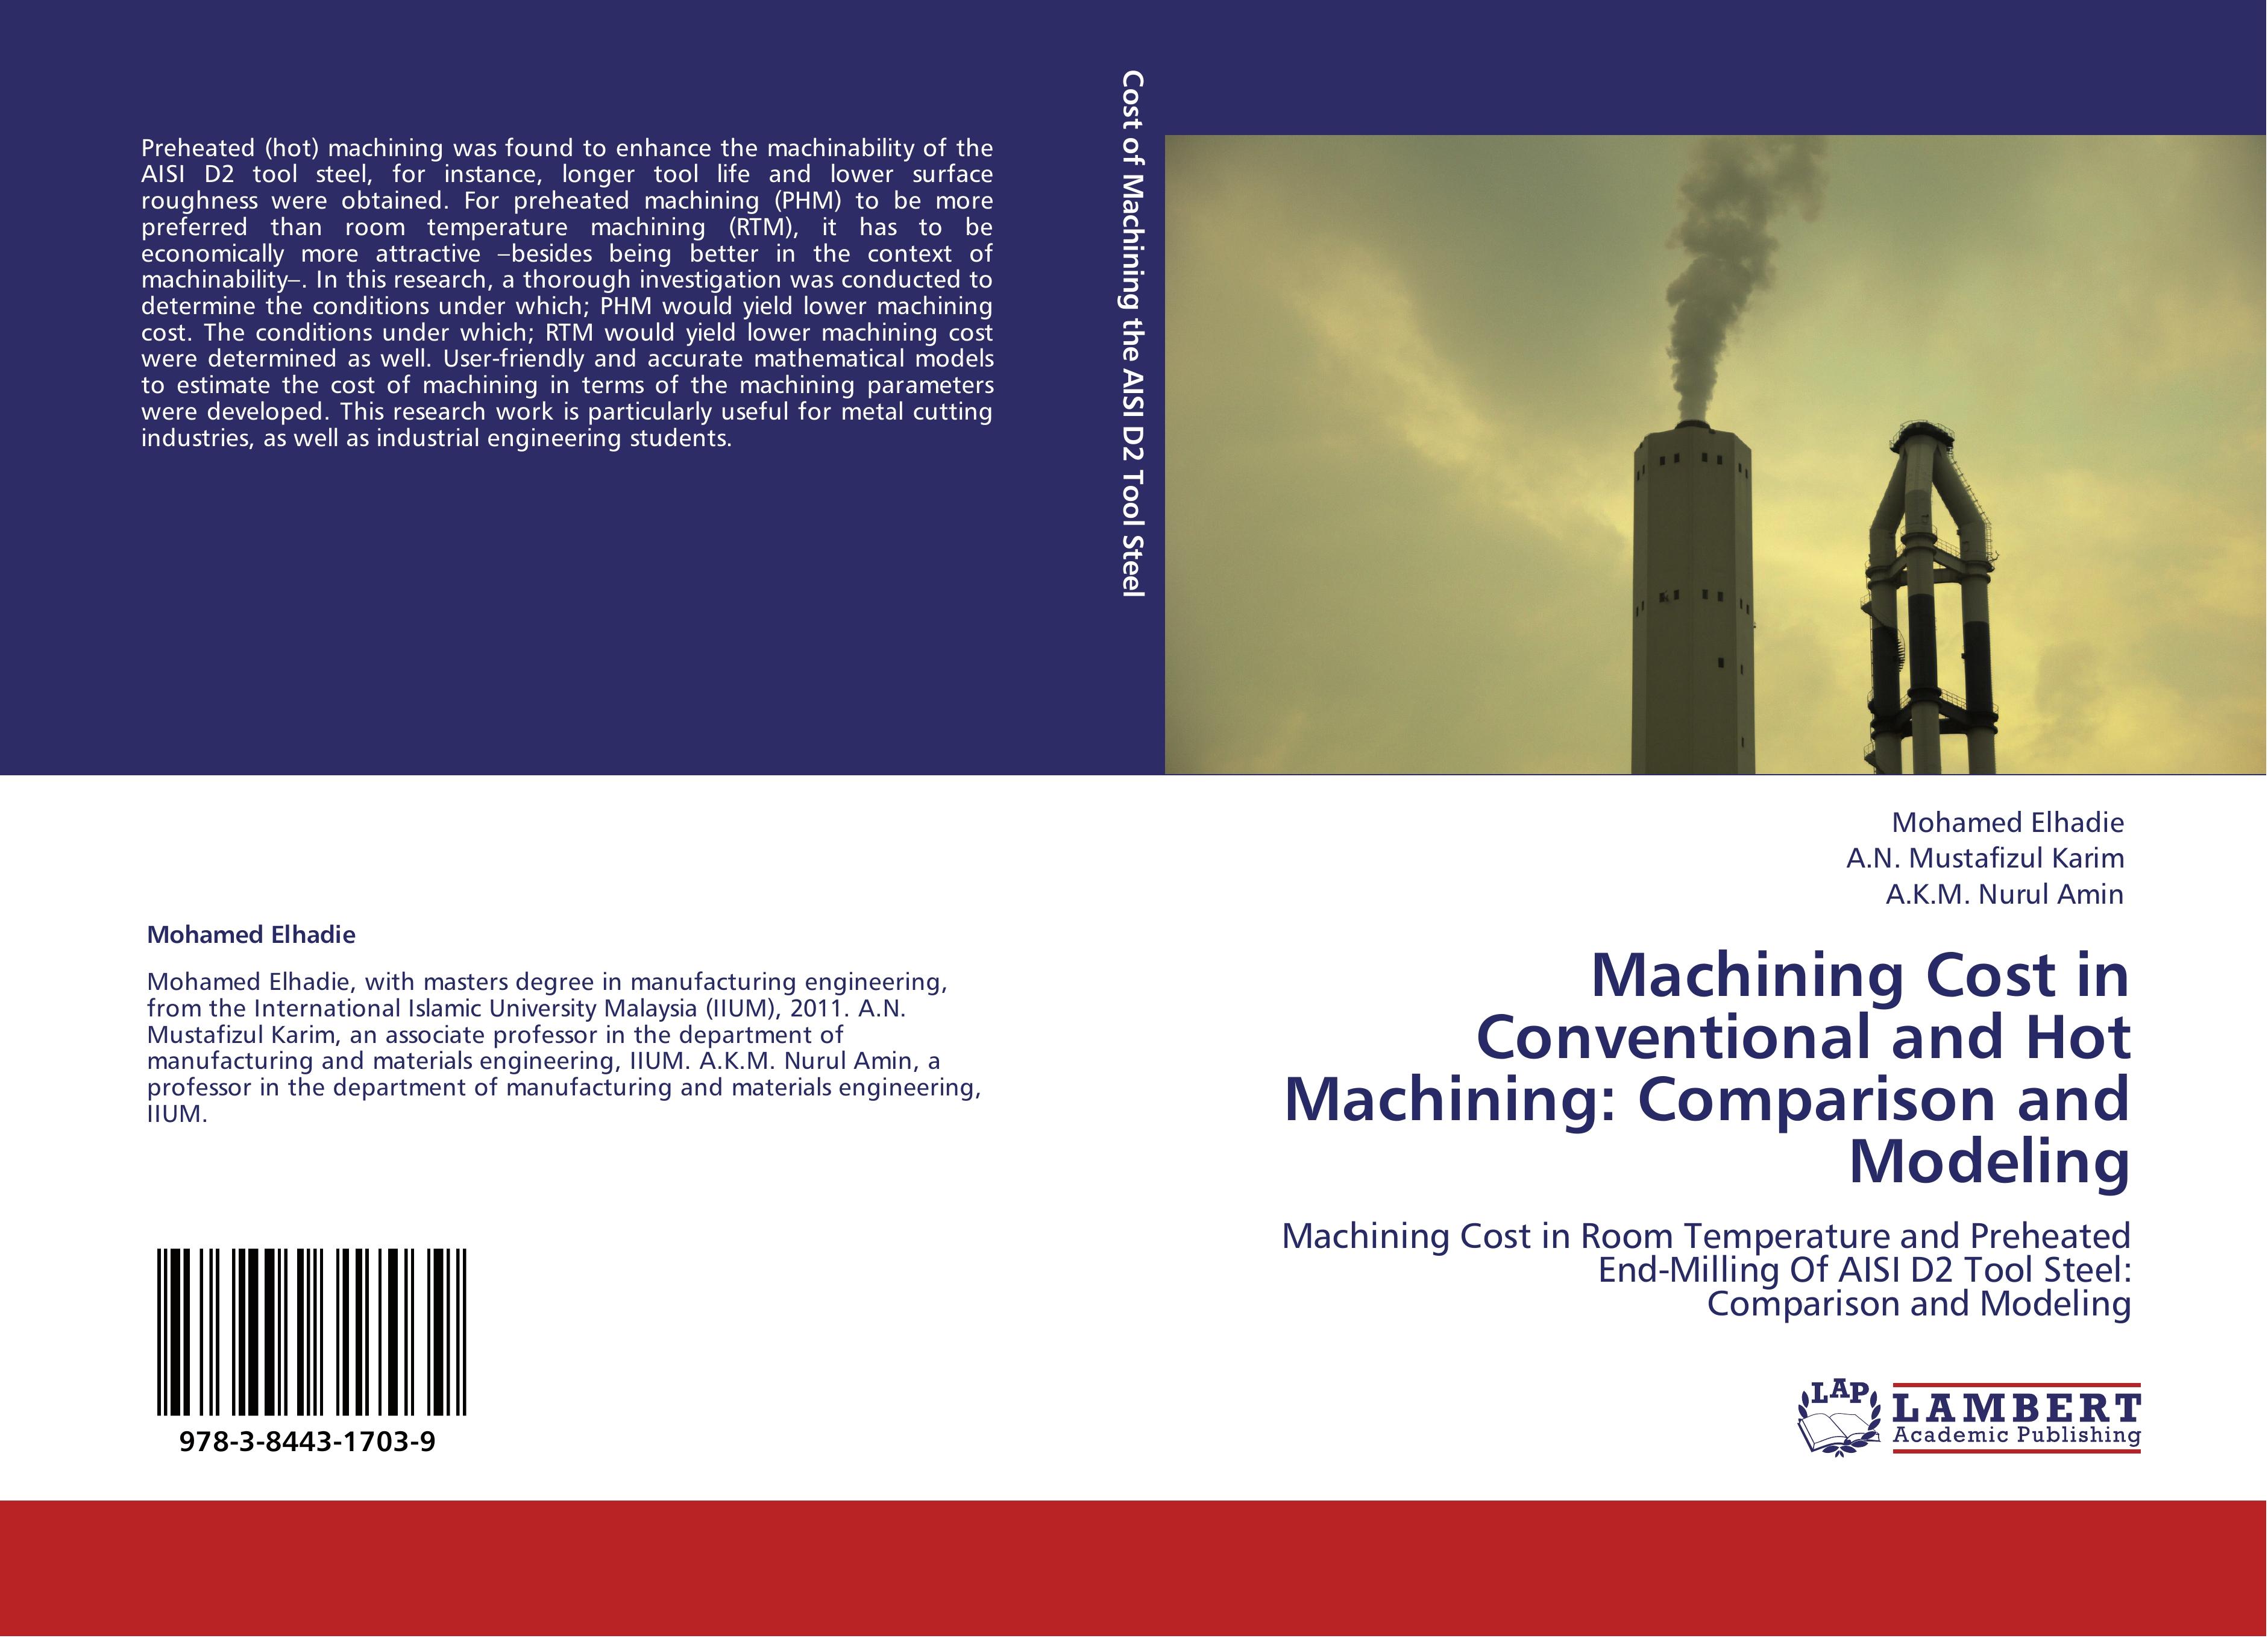 Machining Cost in Conventional and Hot Machining: Comparison and Modeling - Elhadie, Mohamed Mustafizul Karim, A. N. Nurul Amin, A. K. M.